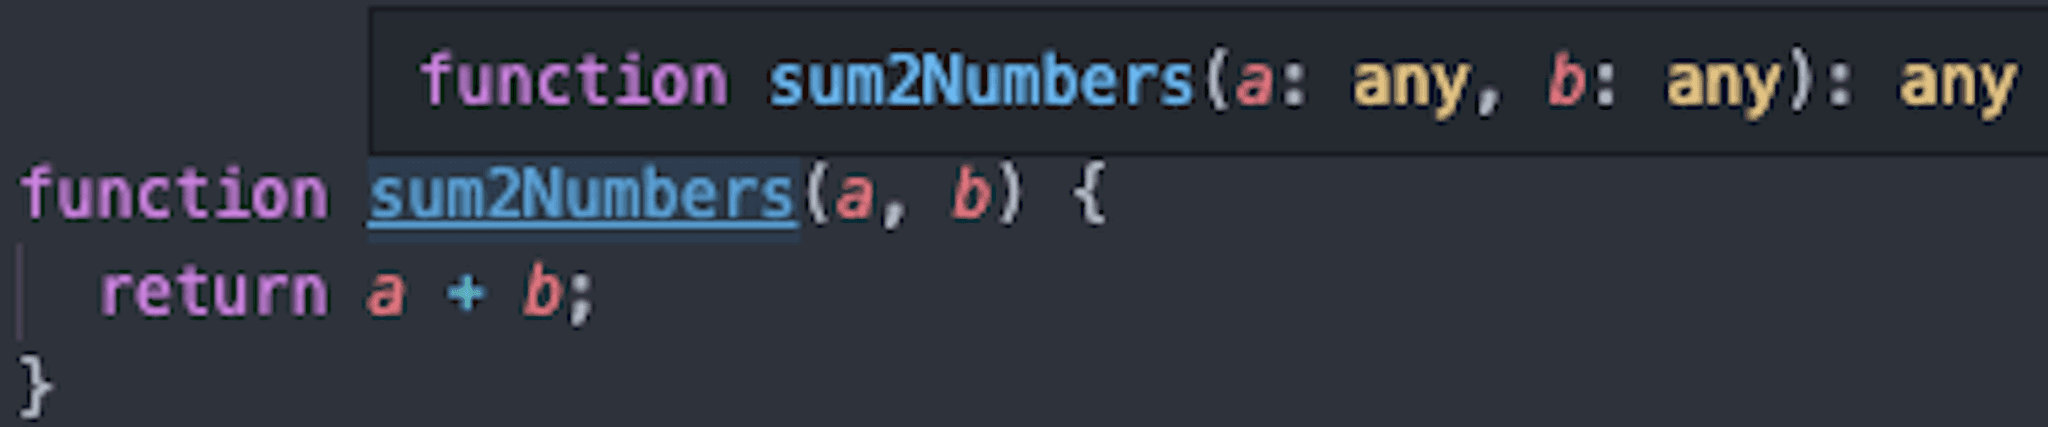 Function sum2Numbers without JSDoc.